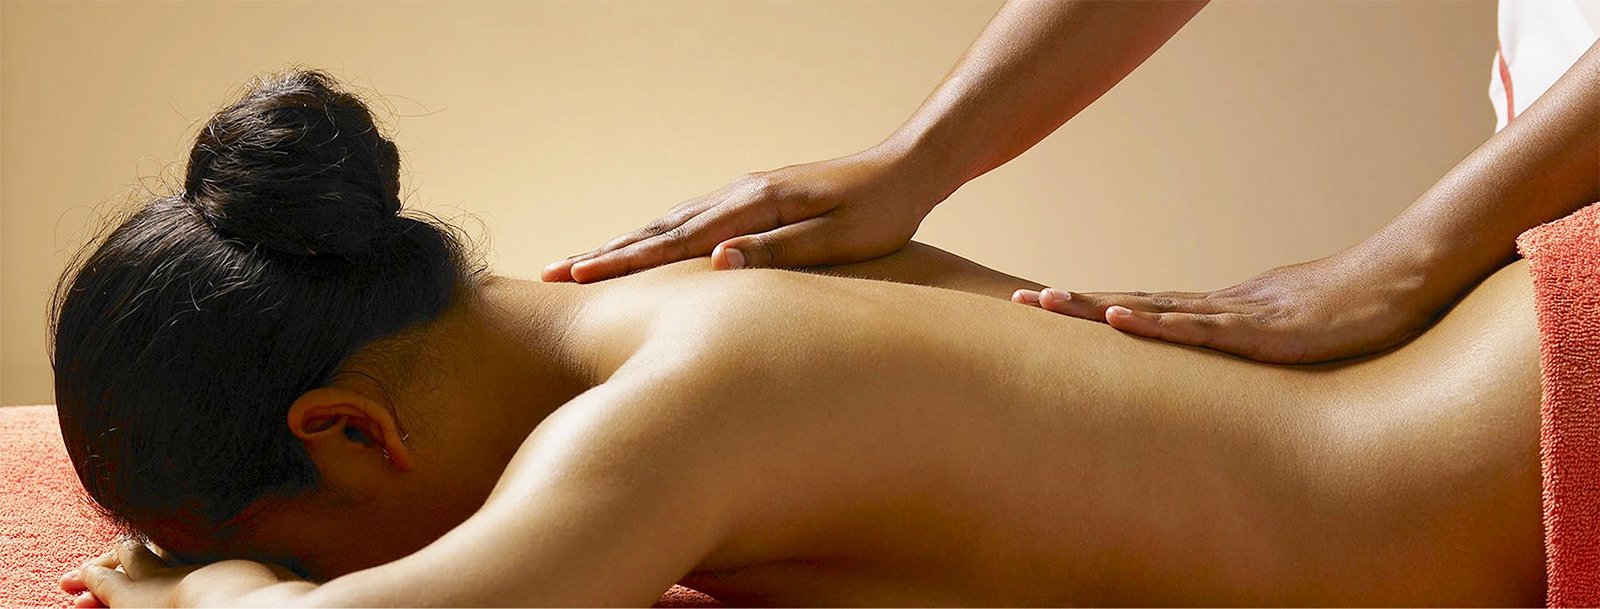 Massage therapy sex